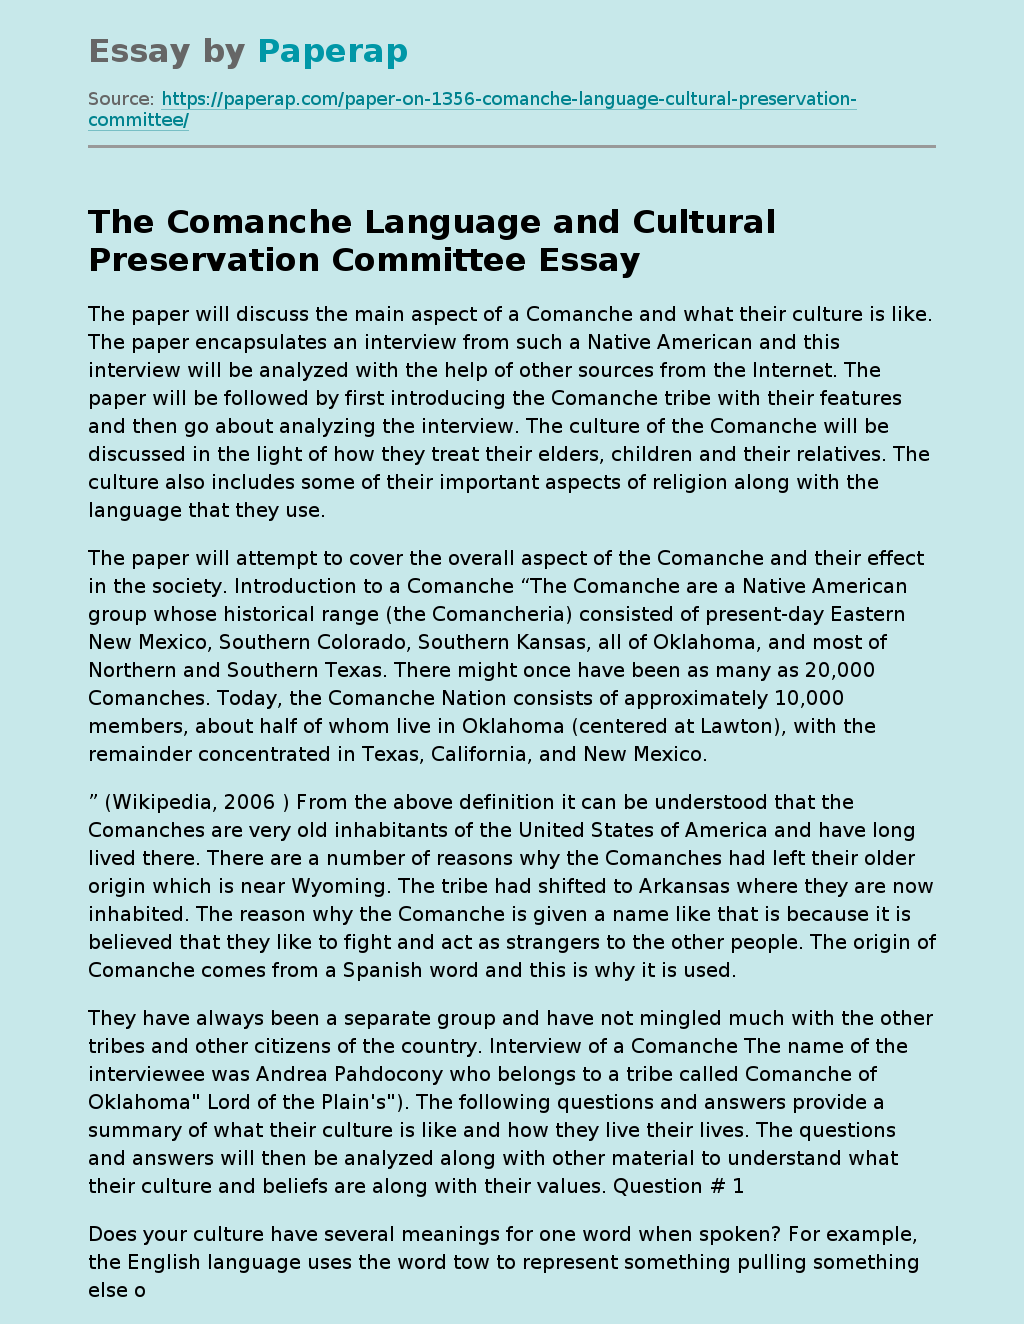 The Comanche Language and Cultural Preservation Committee